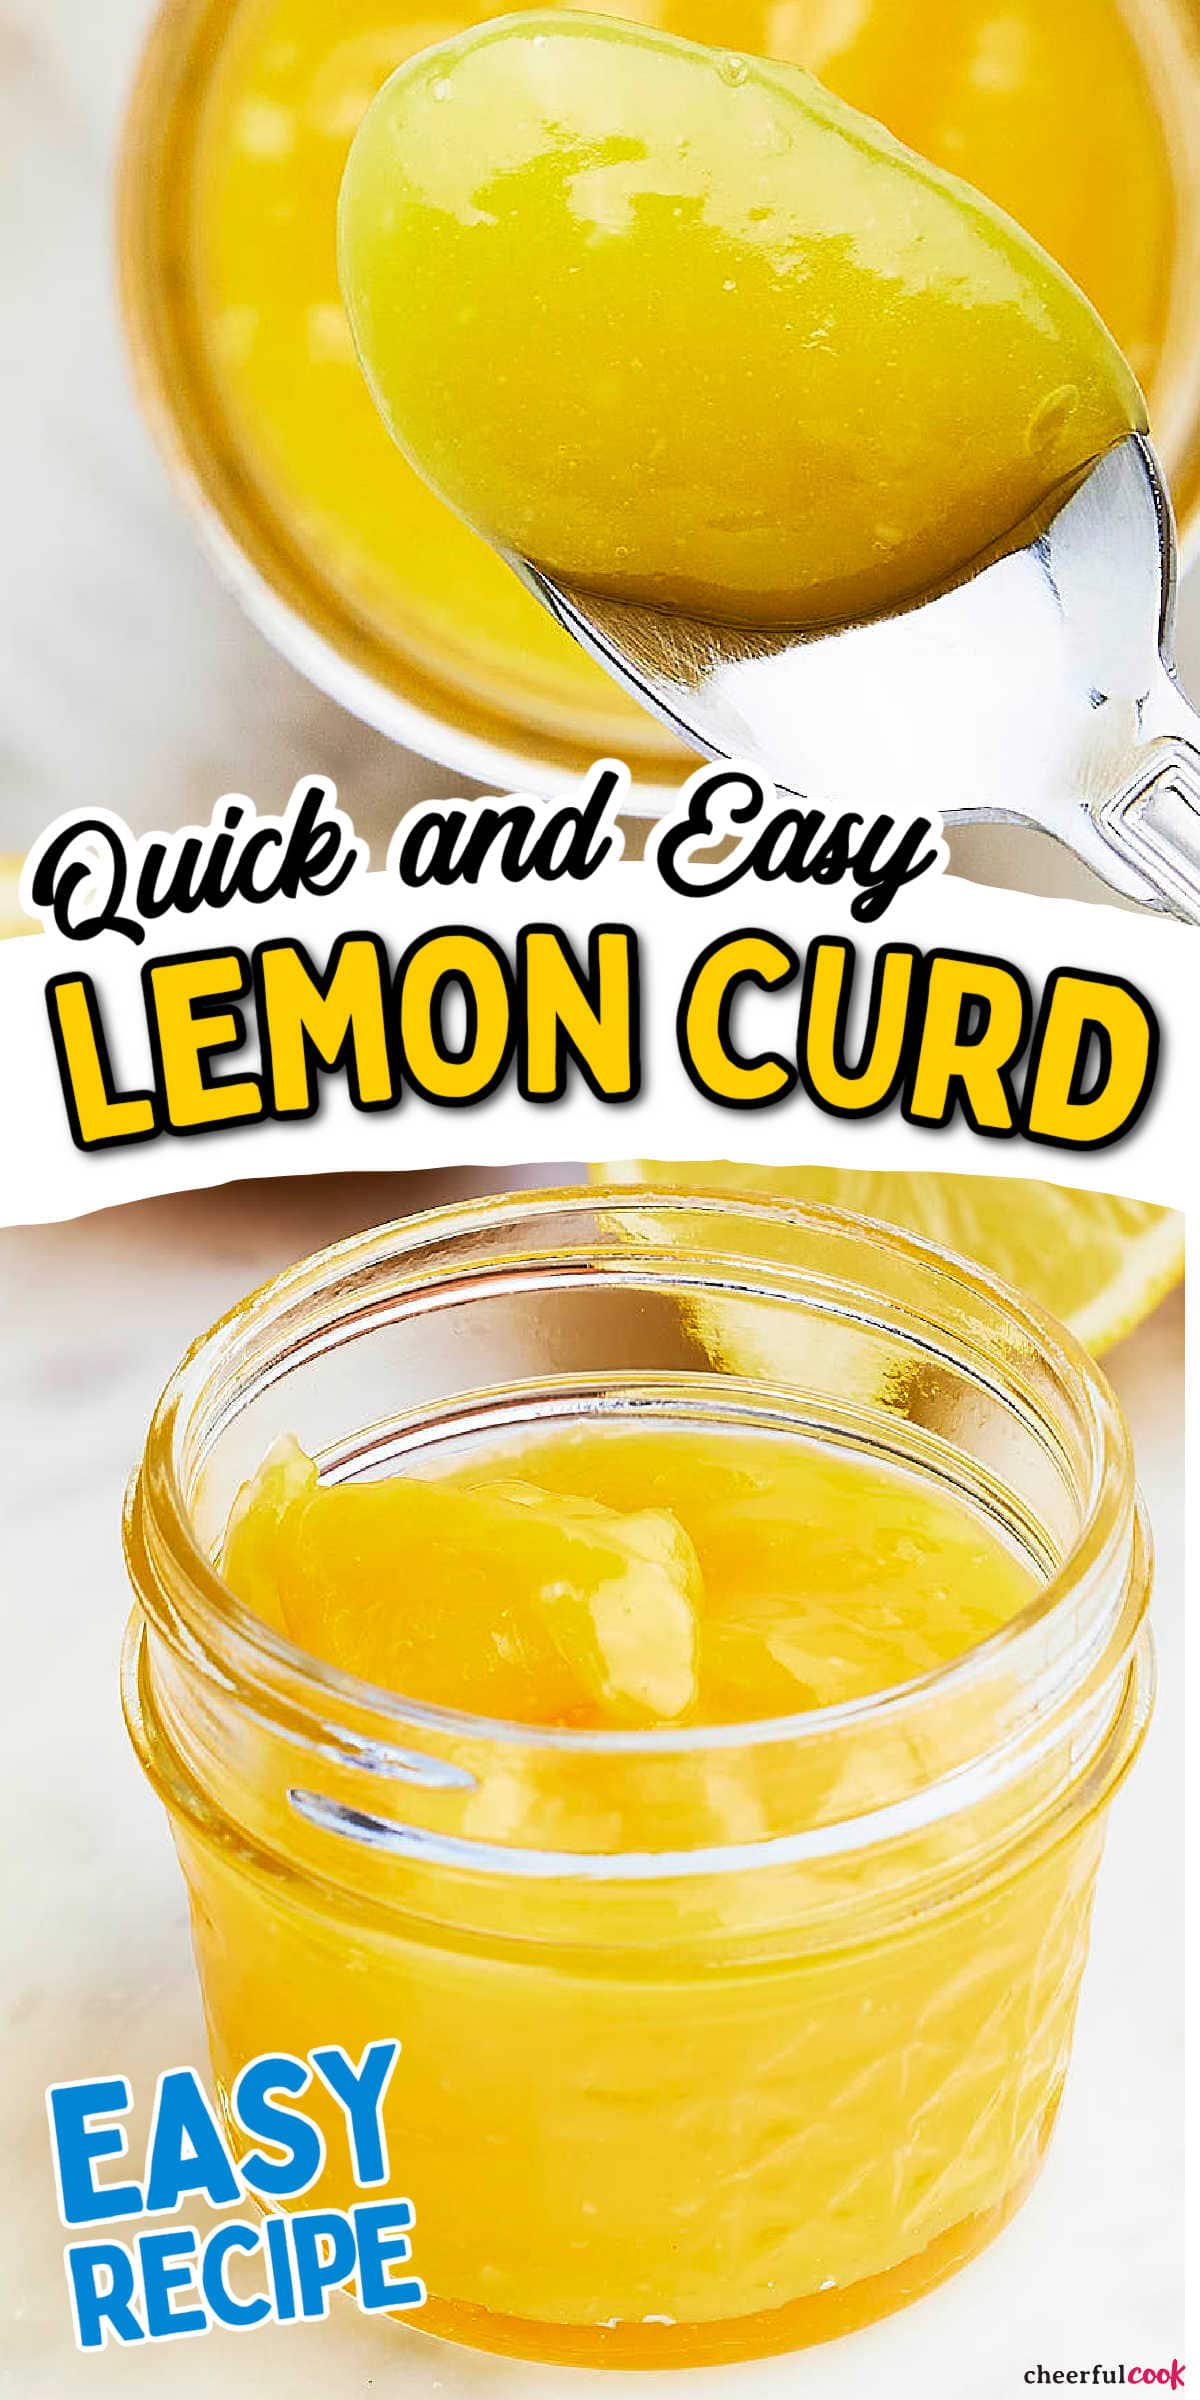 Add a zesty twist to your favorite desserts with this quick and utterly delicious homemade Lemon Curd recipe! It's easier than you think and takes just 10-15 minutes! #cheerfulcook #lemoncurd #lemondesserts #lemonrecipes #saucerecipes #dessertswithlemon via @cheerfulcook